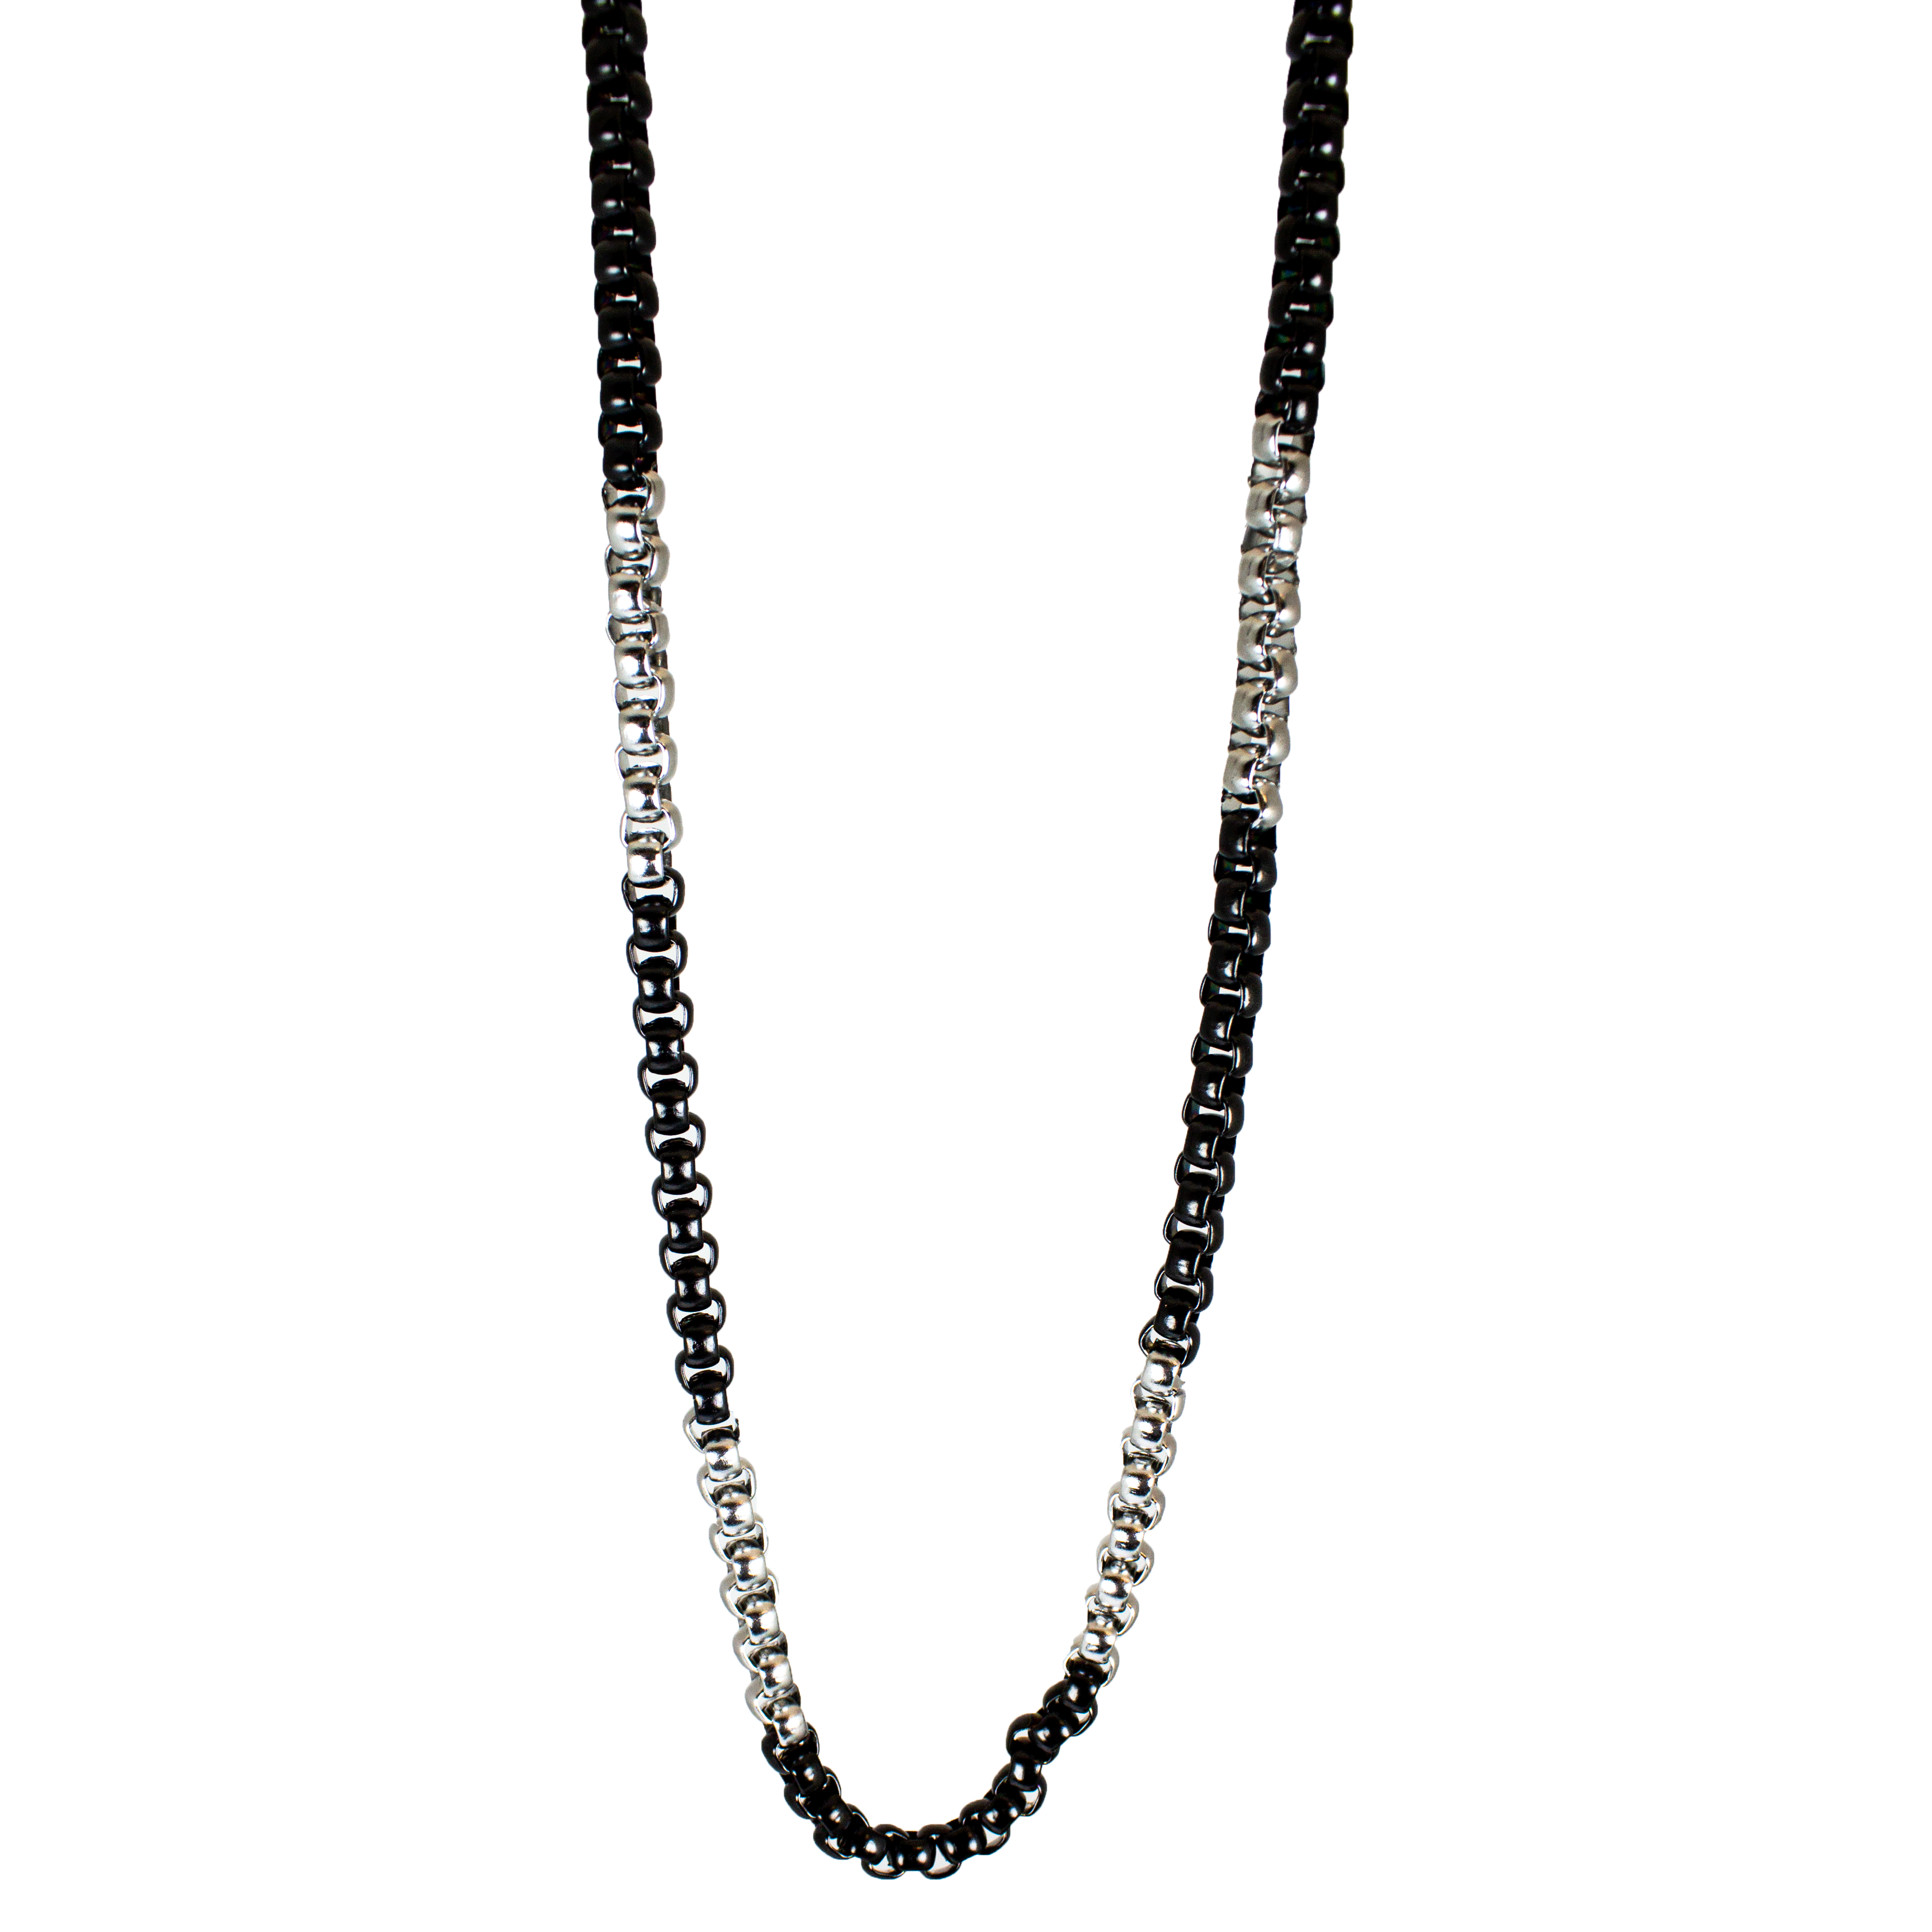 BOL Men's Two Tone Silver & Black Stainless Steel Chain Necklace